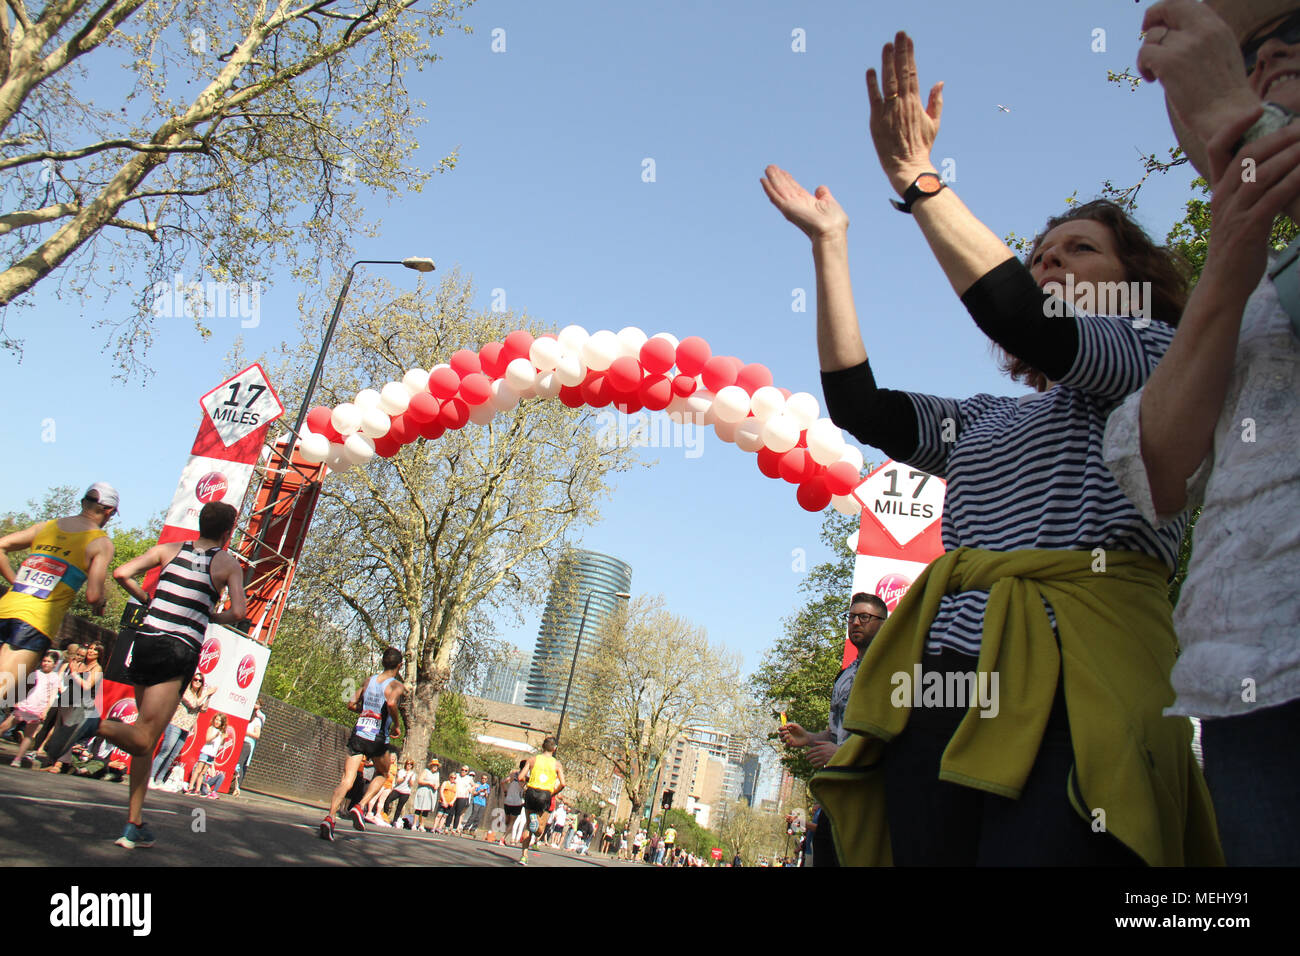 London, United Kingdom - April 22: Londoners turned up in therei droves to watch runners participate in the Virgin Money London Marathon on April 22, 2018. Over 40,000 are expected to start the 26.2 miles run from Greenwich to Westminster.© David Mbiyu/Alamy Live News Stock Photo